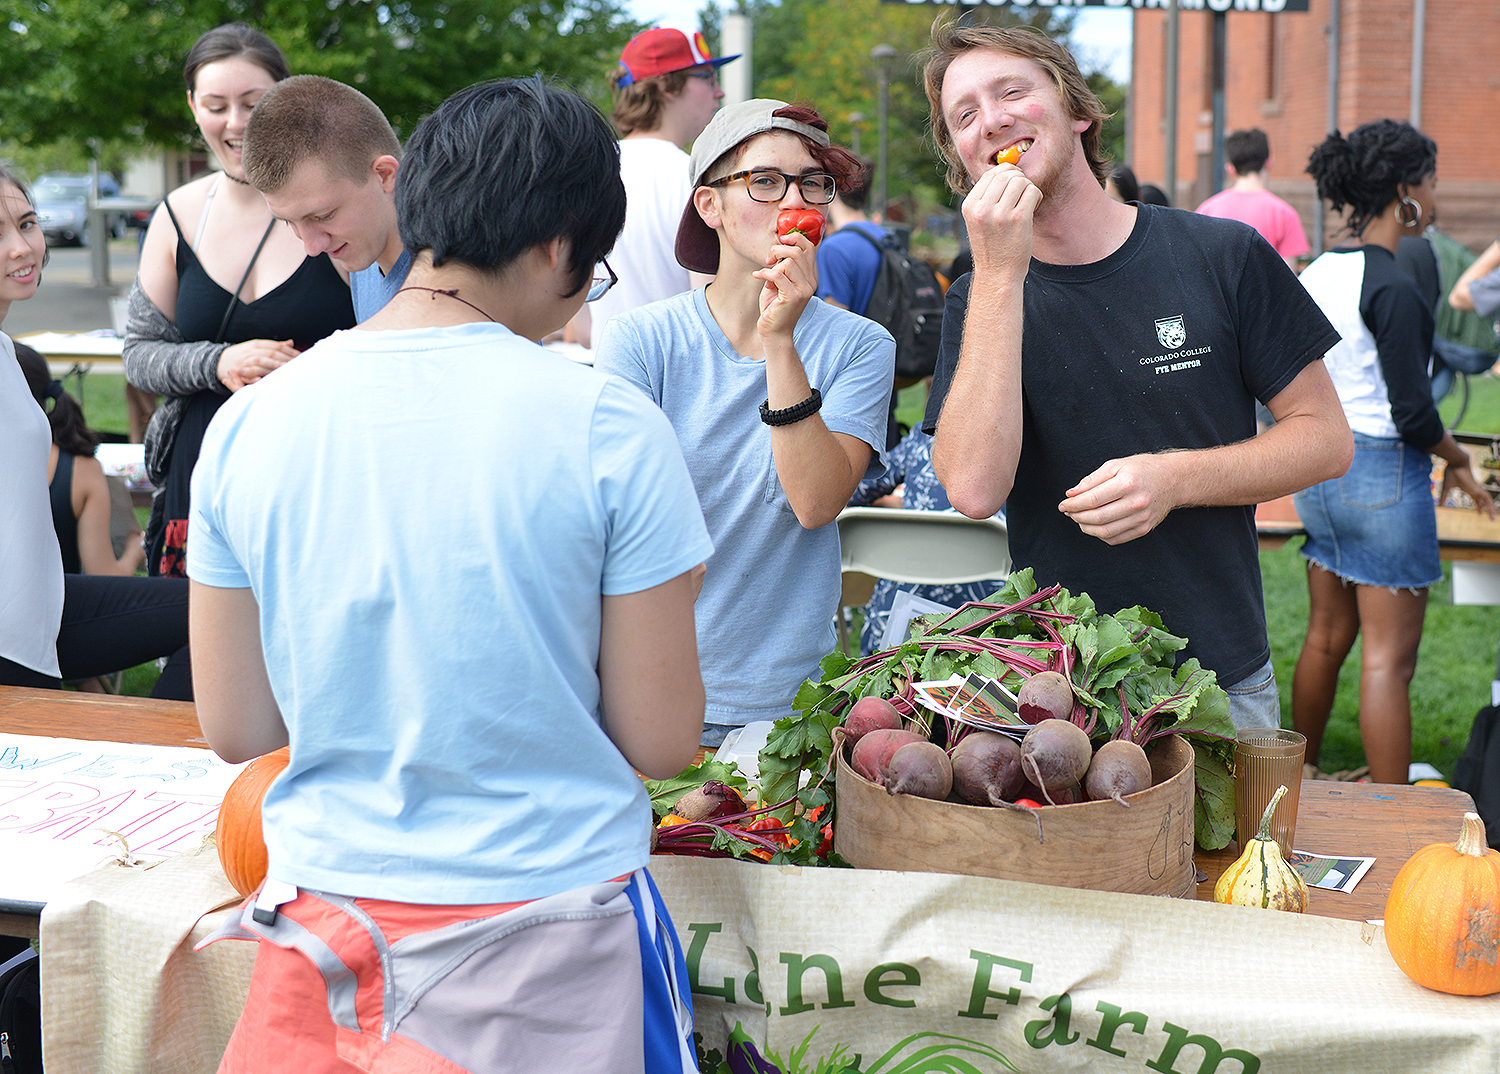 Long Lane Farm is Wesleyan's student-run organic farm, located at 281 Long Lane. Throughout the year, students grow and sell a variety of vegetables, fruits, herbs, and products. They host community events and programs such as PumpkinFest and the Middletown Food Project.